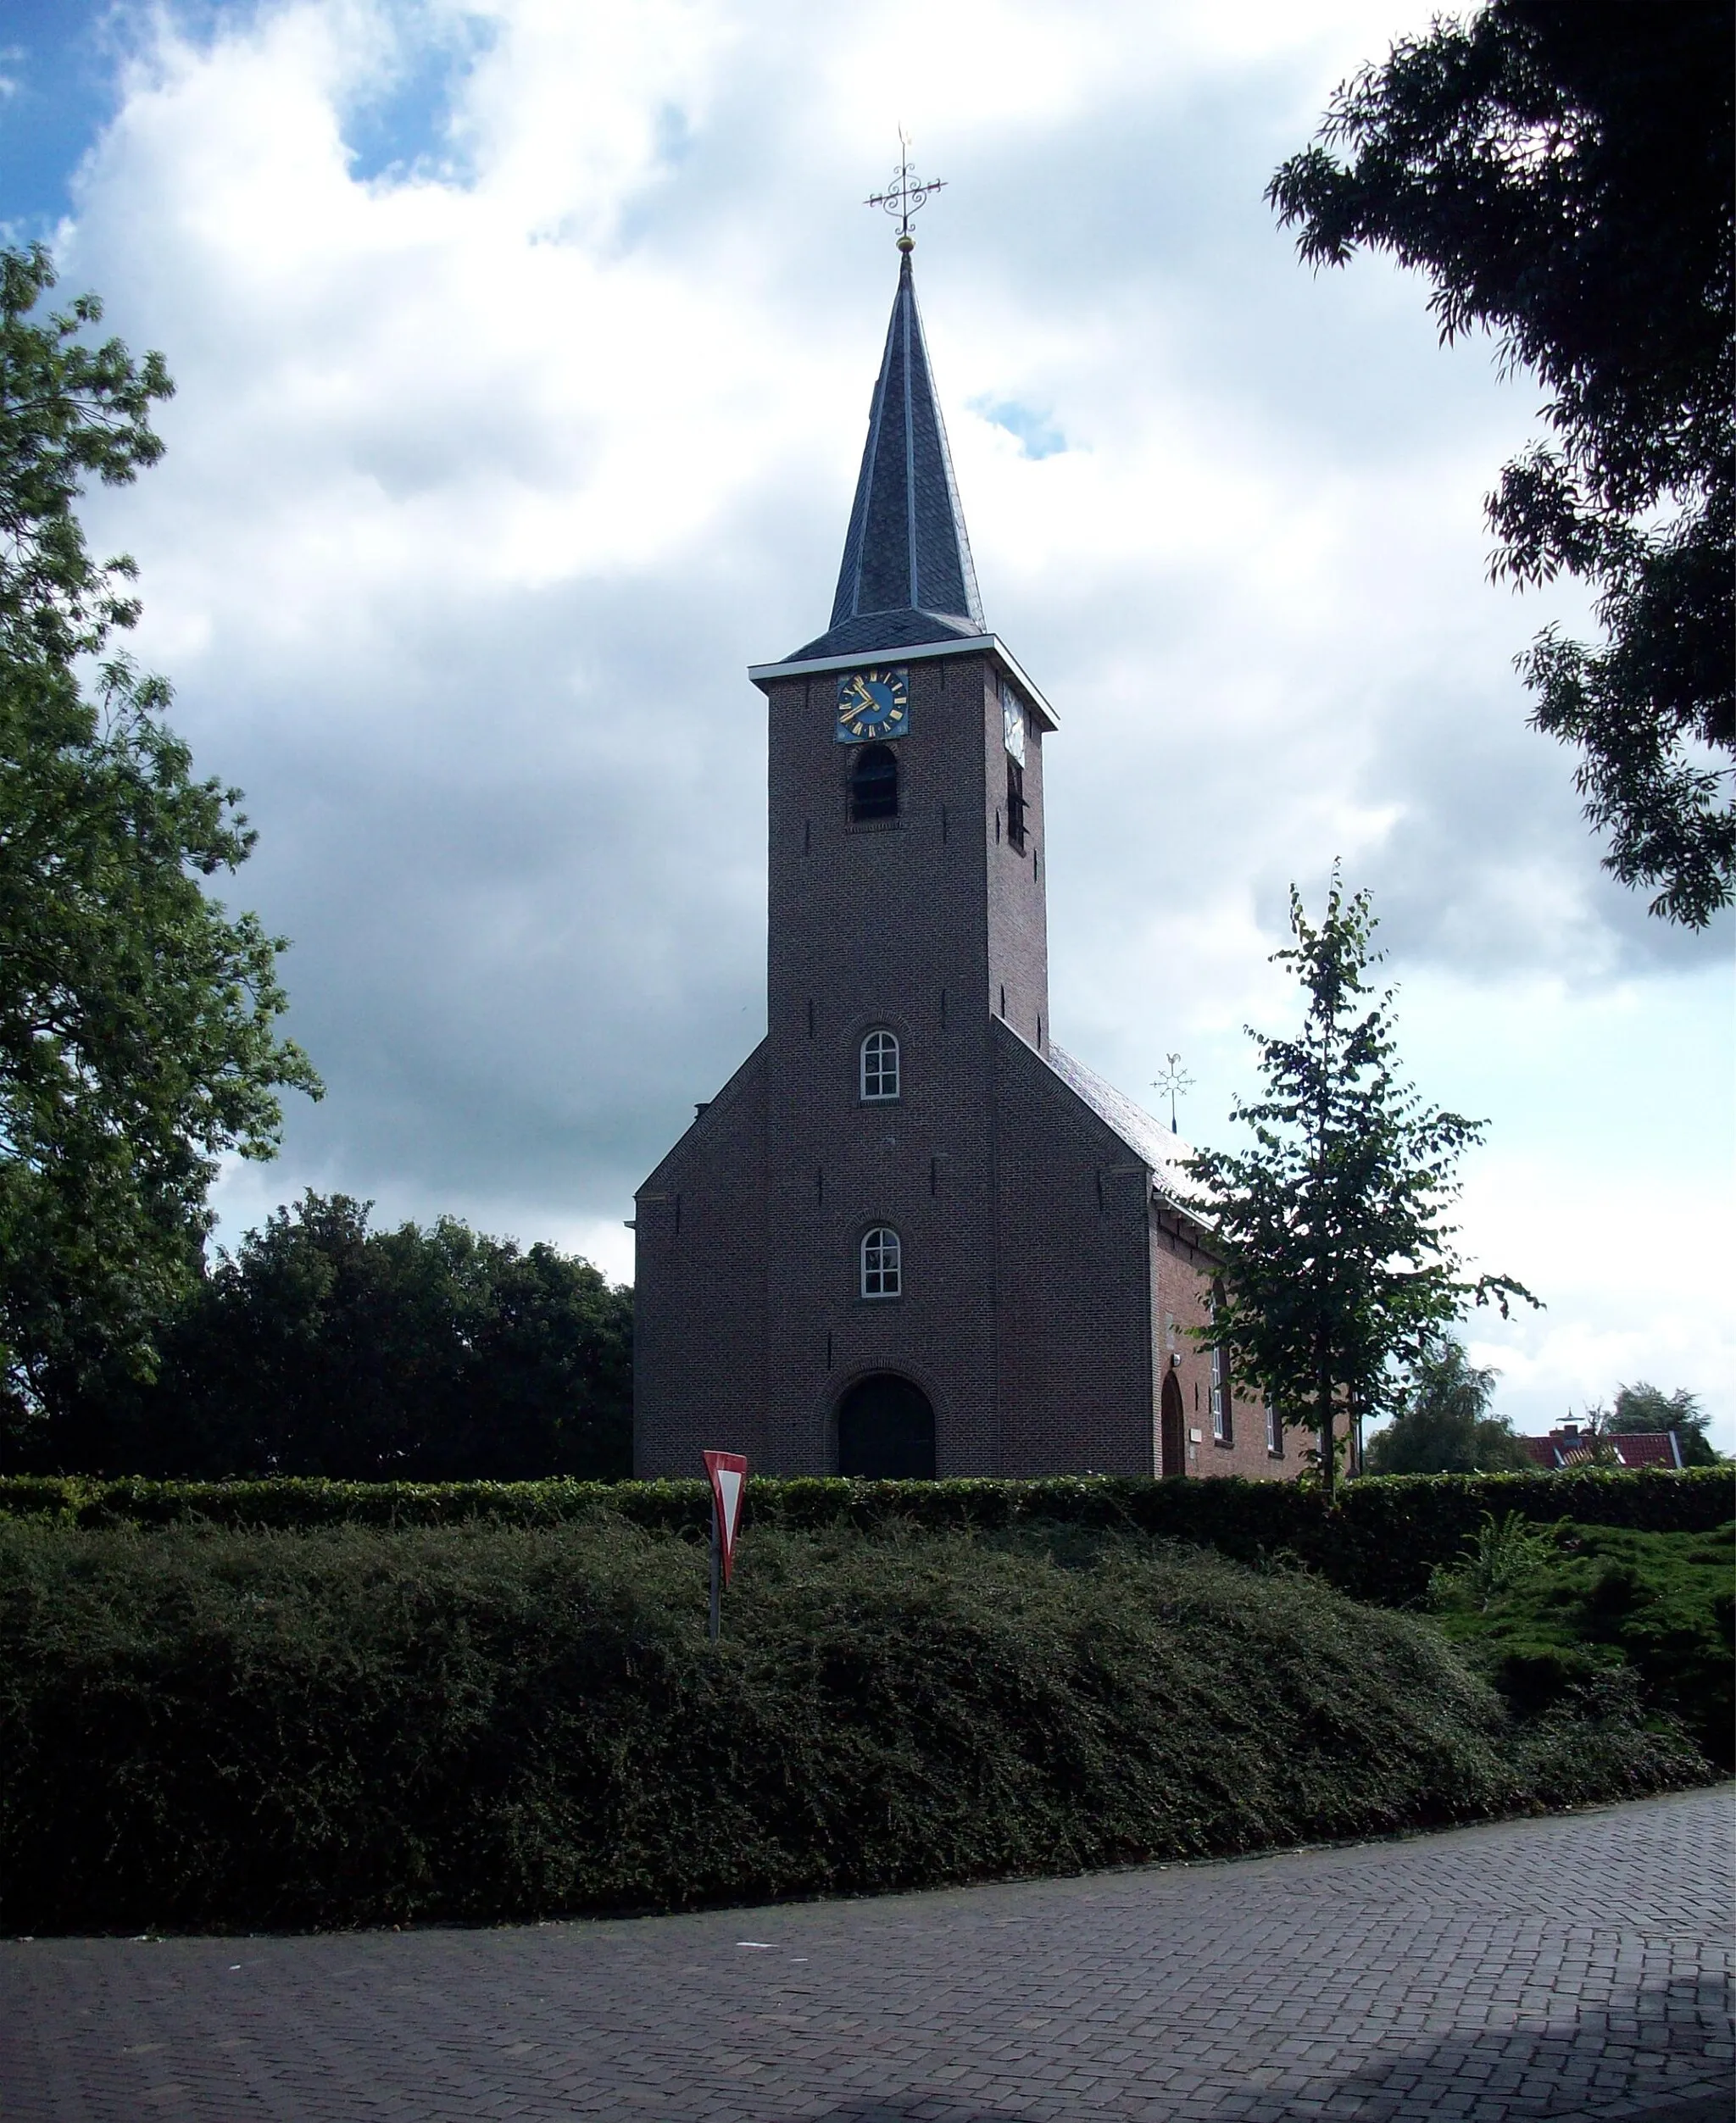 Photo showing: The church of Garyp, in the Dutch province of Friesland